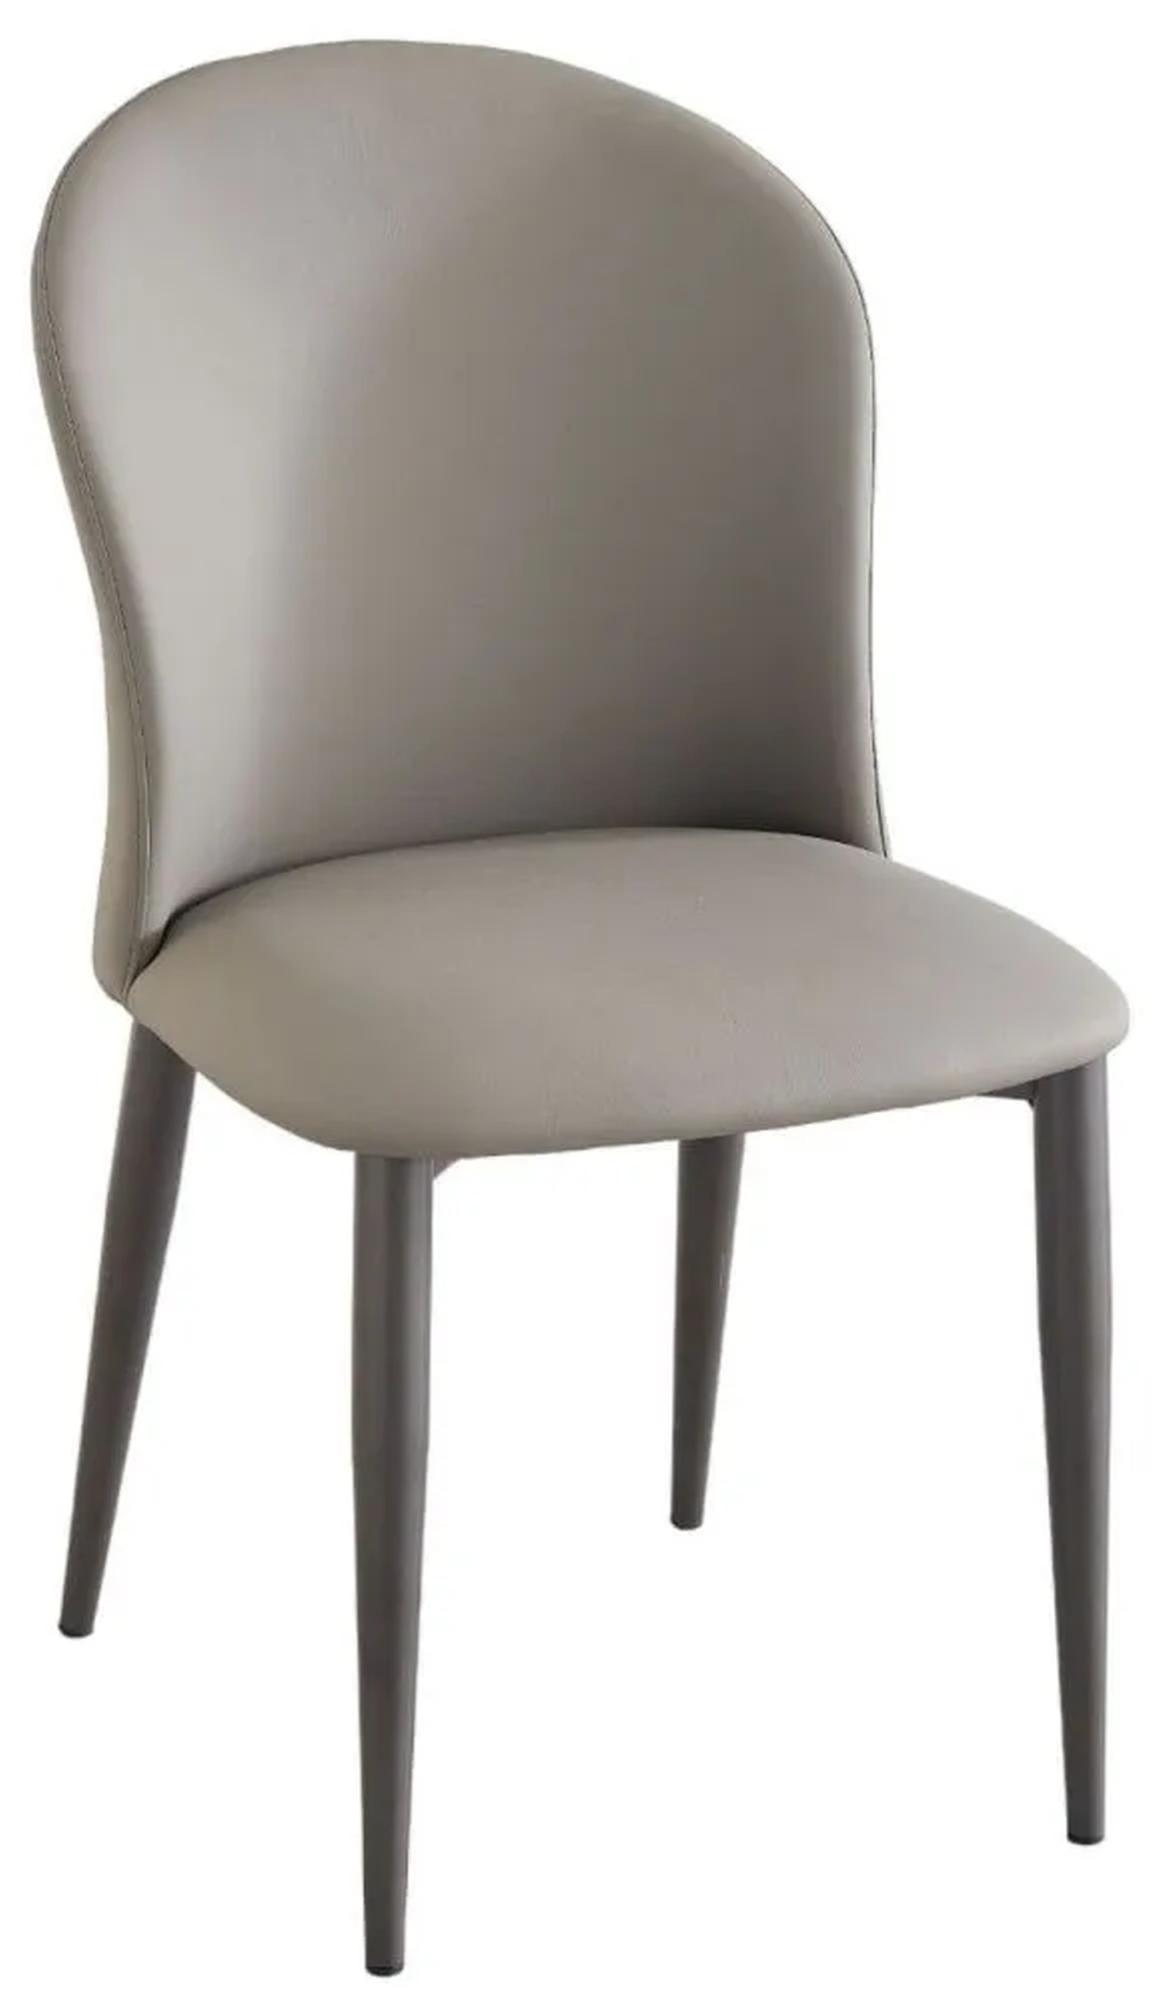 Nancy Grey Faux Leather High Back Dining Chair with Bronze Legs